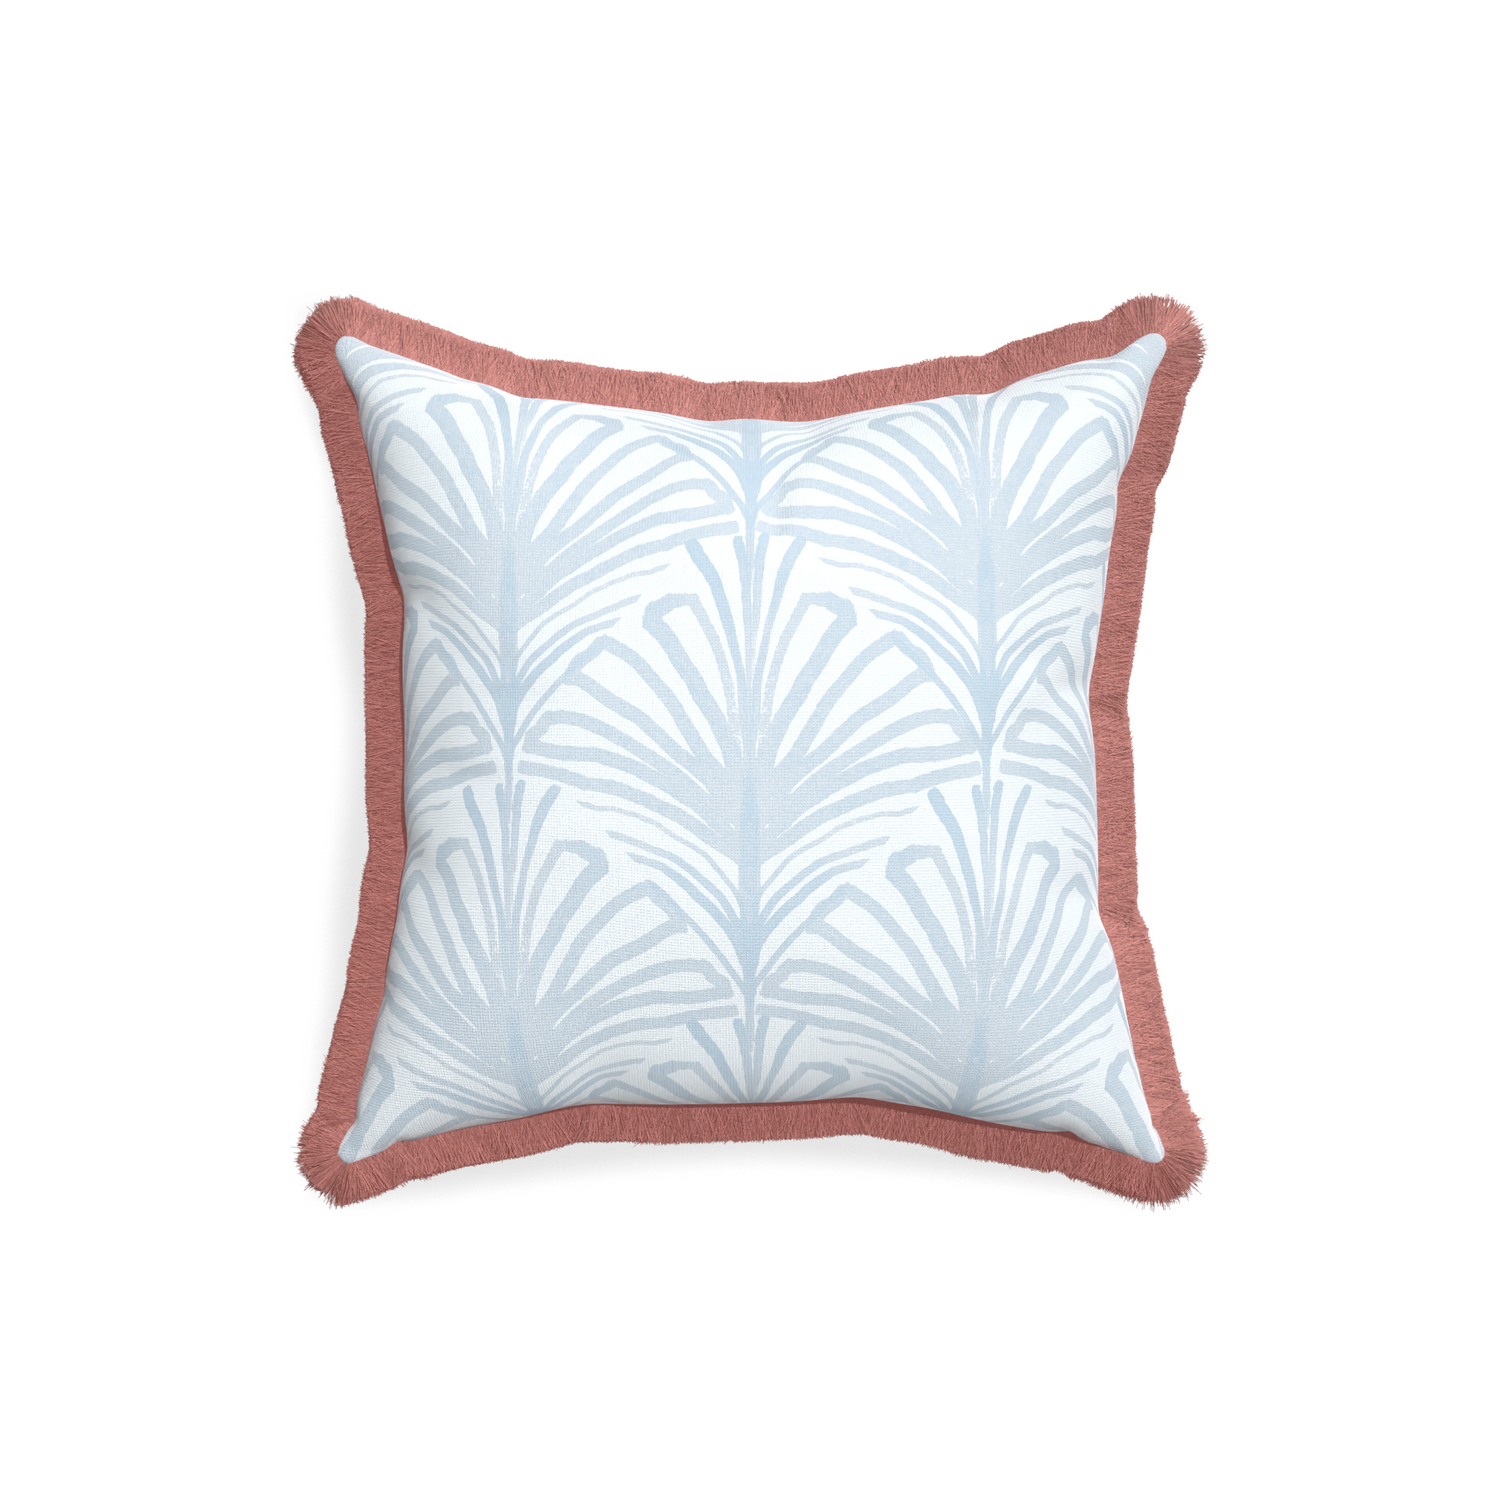 18-square suzy sky custom pillow with d fringe on white background